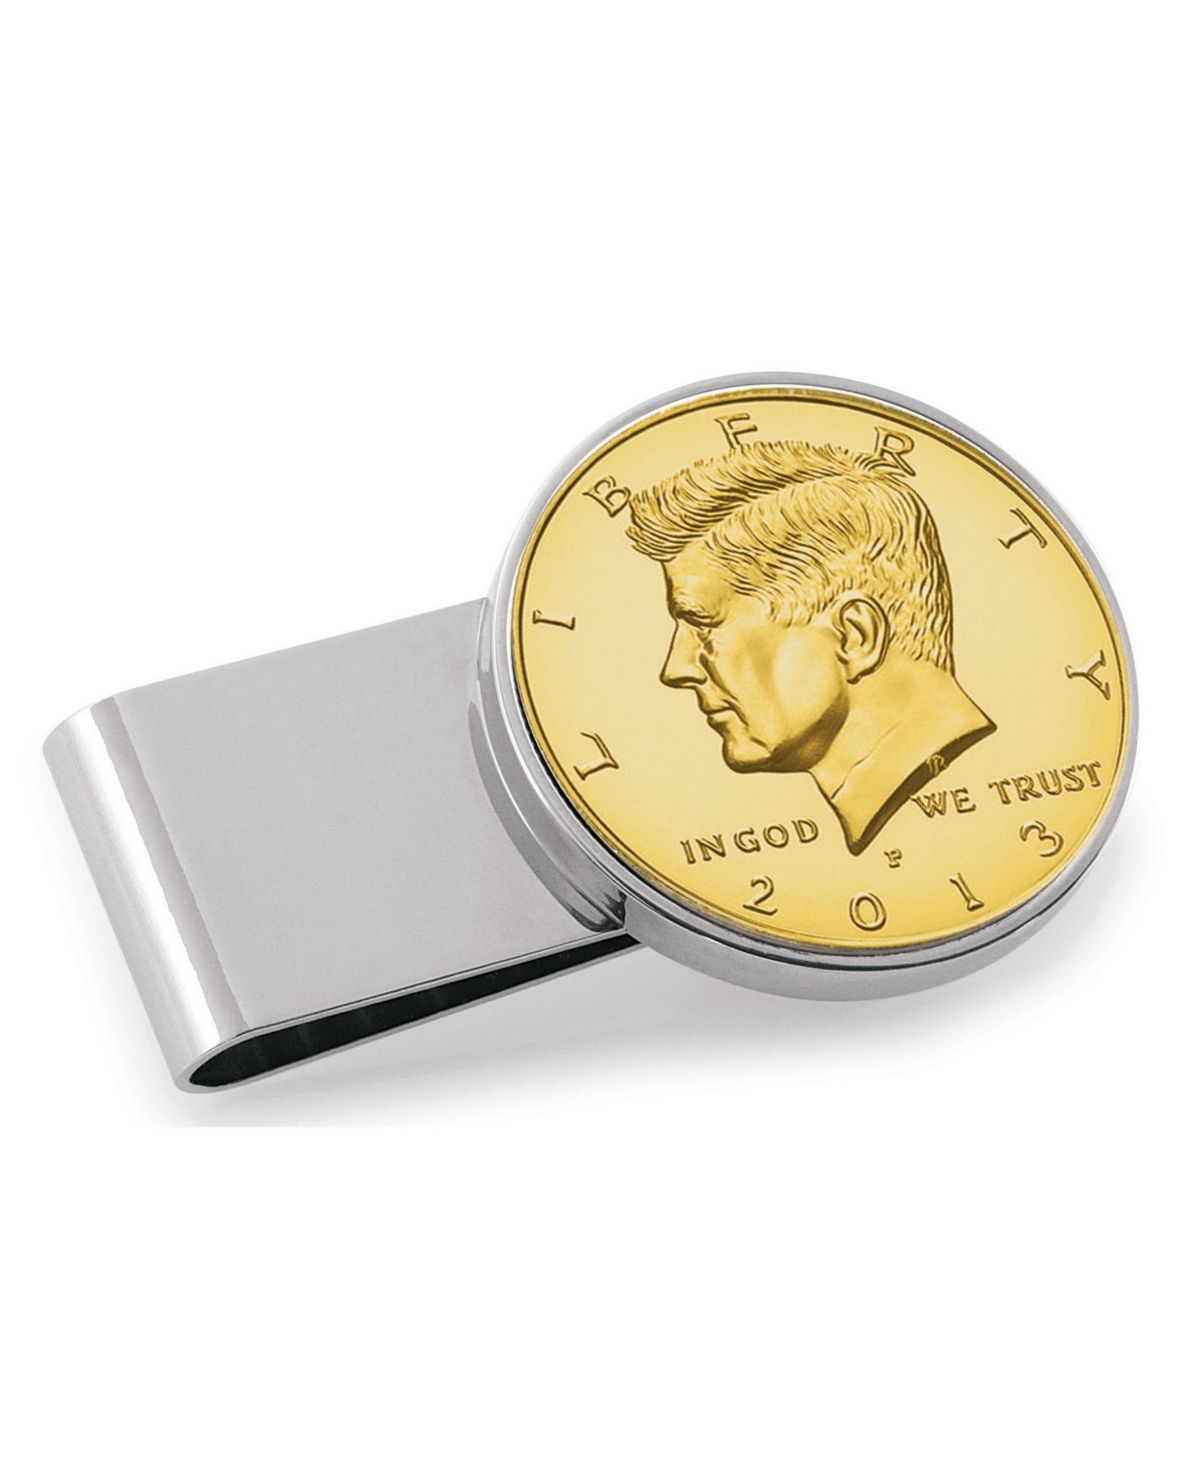 Men's American Coin Treasures Gold-Layered Jfk Half Dollar Stainless Steel Coin Money Clip - Silver